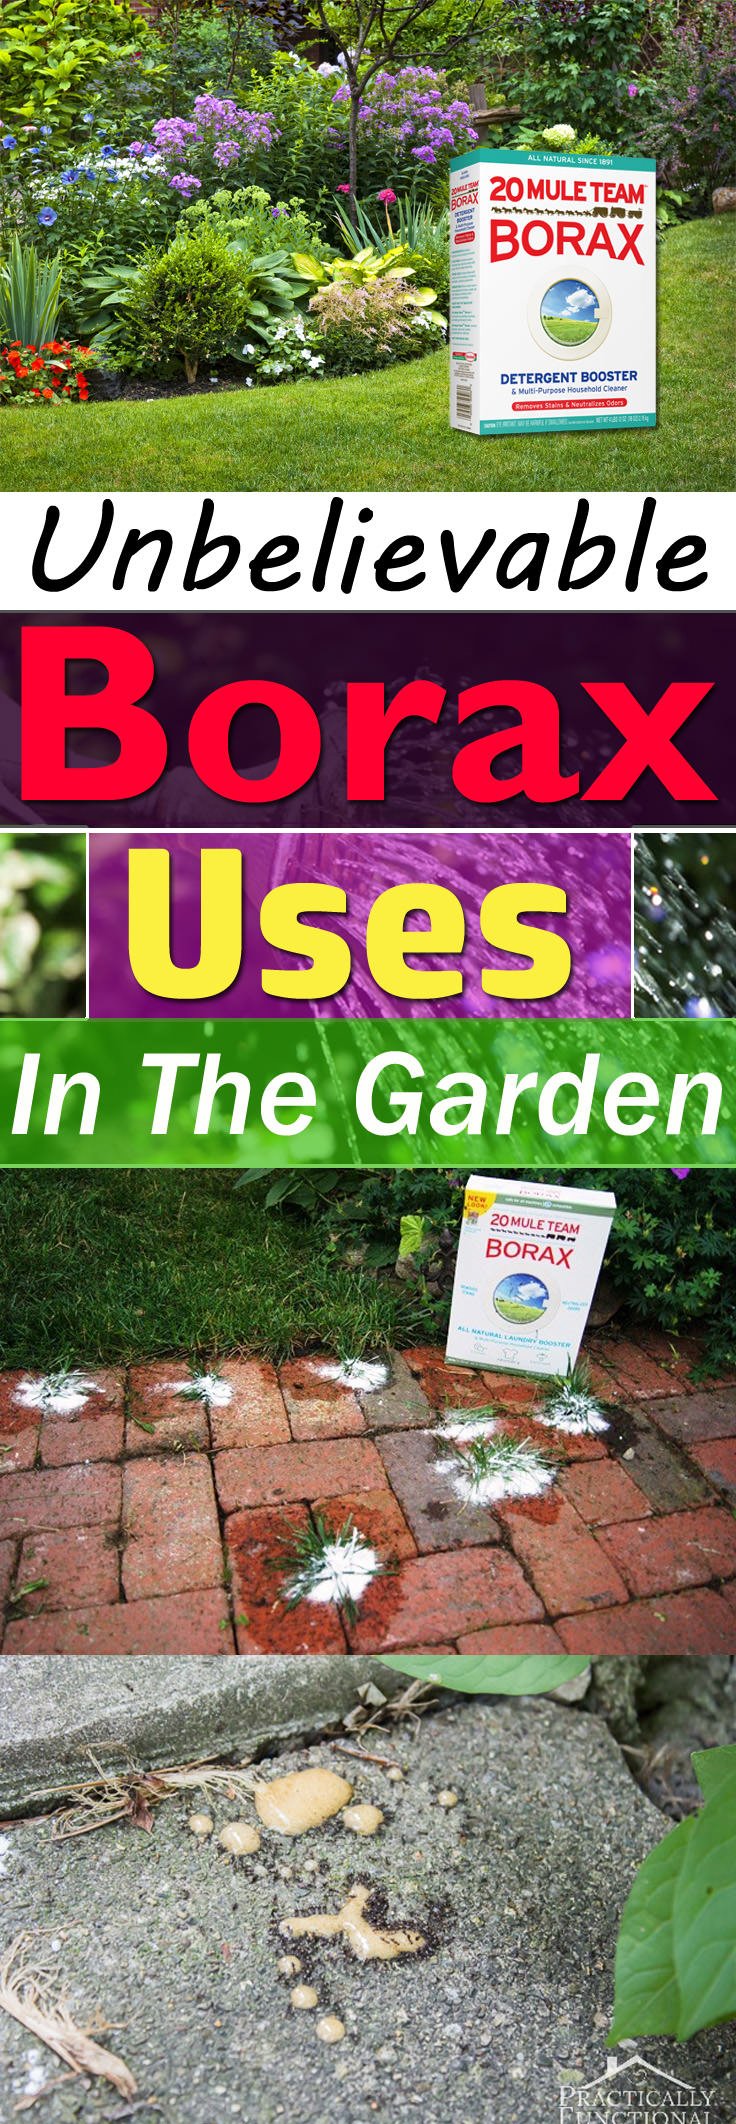 Borax is used for various house chores but did you know this naturally occurring mineral can be used in the garden too? Check out!